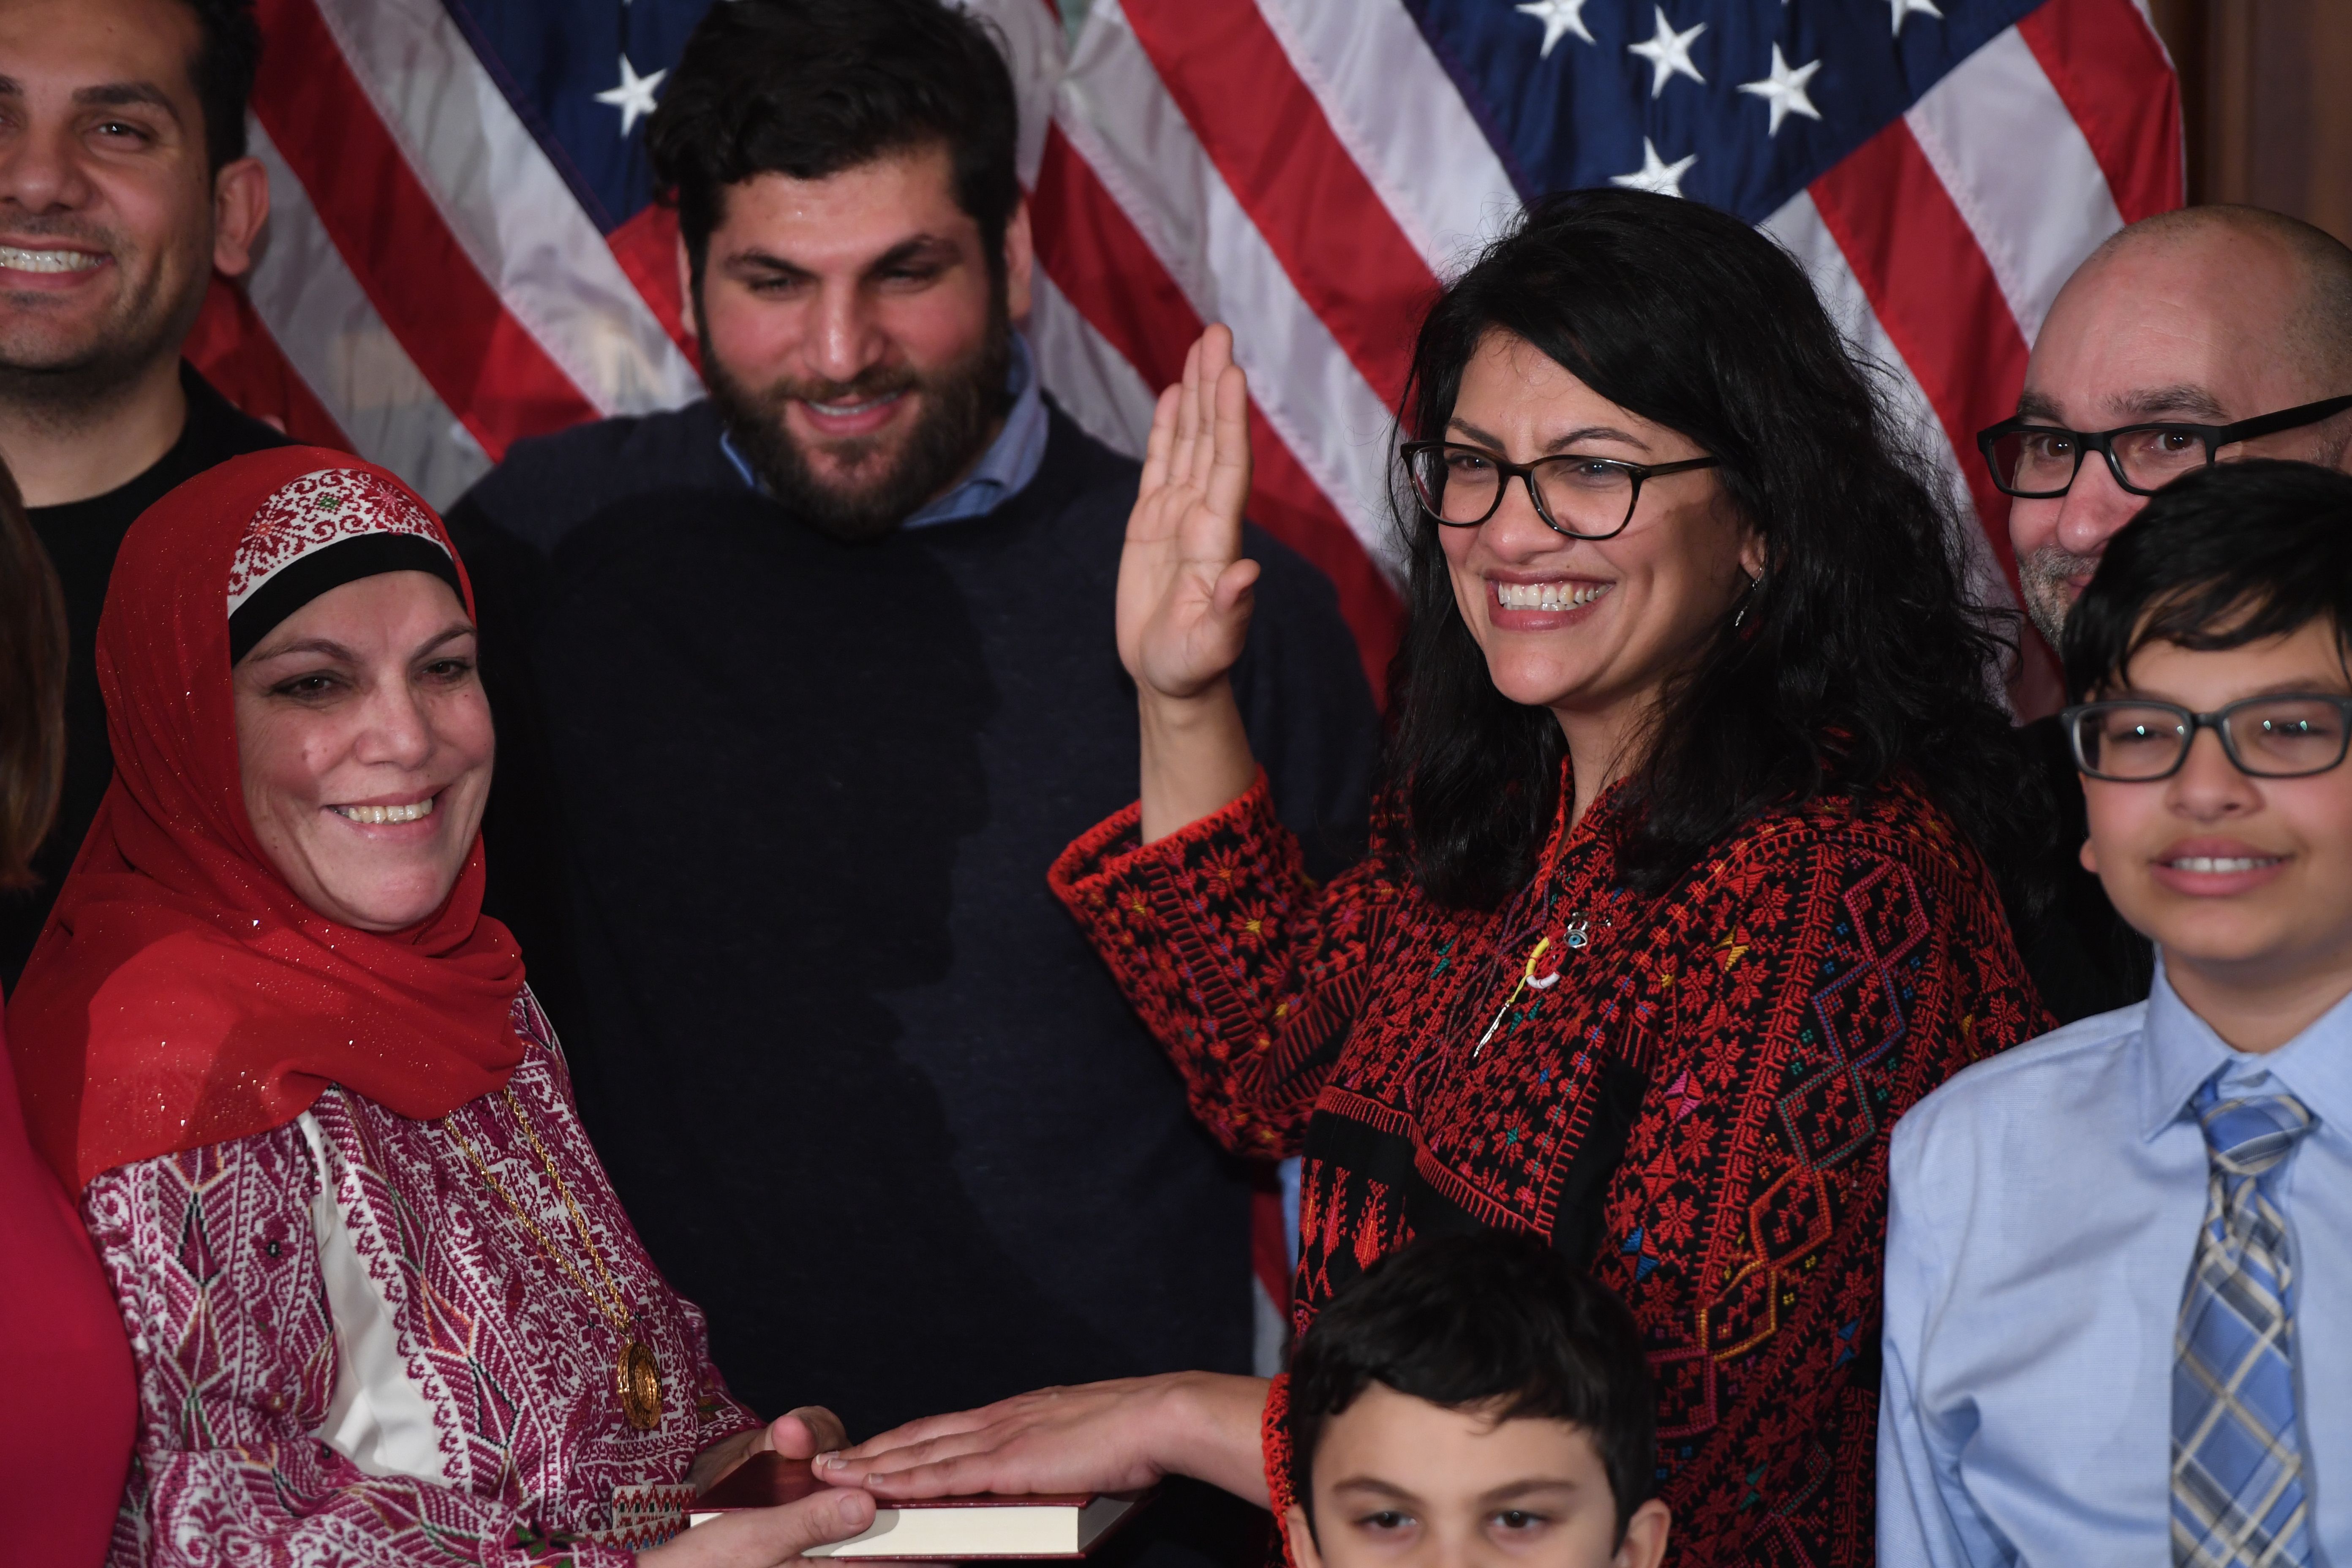 US House Representative Rashida Tlaib (D-MI), wearing a traditional Palestinian robe, takes the oath of office on Thomas Jefferson's English translated Quran, with family members present in a ceremonial swearing-in from Speaker of the House Nancy Pelosi (D-CA) (out of frame) at the start of the 116th Congress at the US Capitol in Washington, DC, January 3, 2019. (SAUL LOEB/AFP/Getty Images)